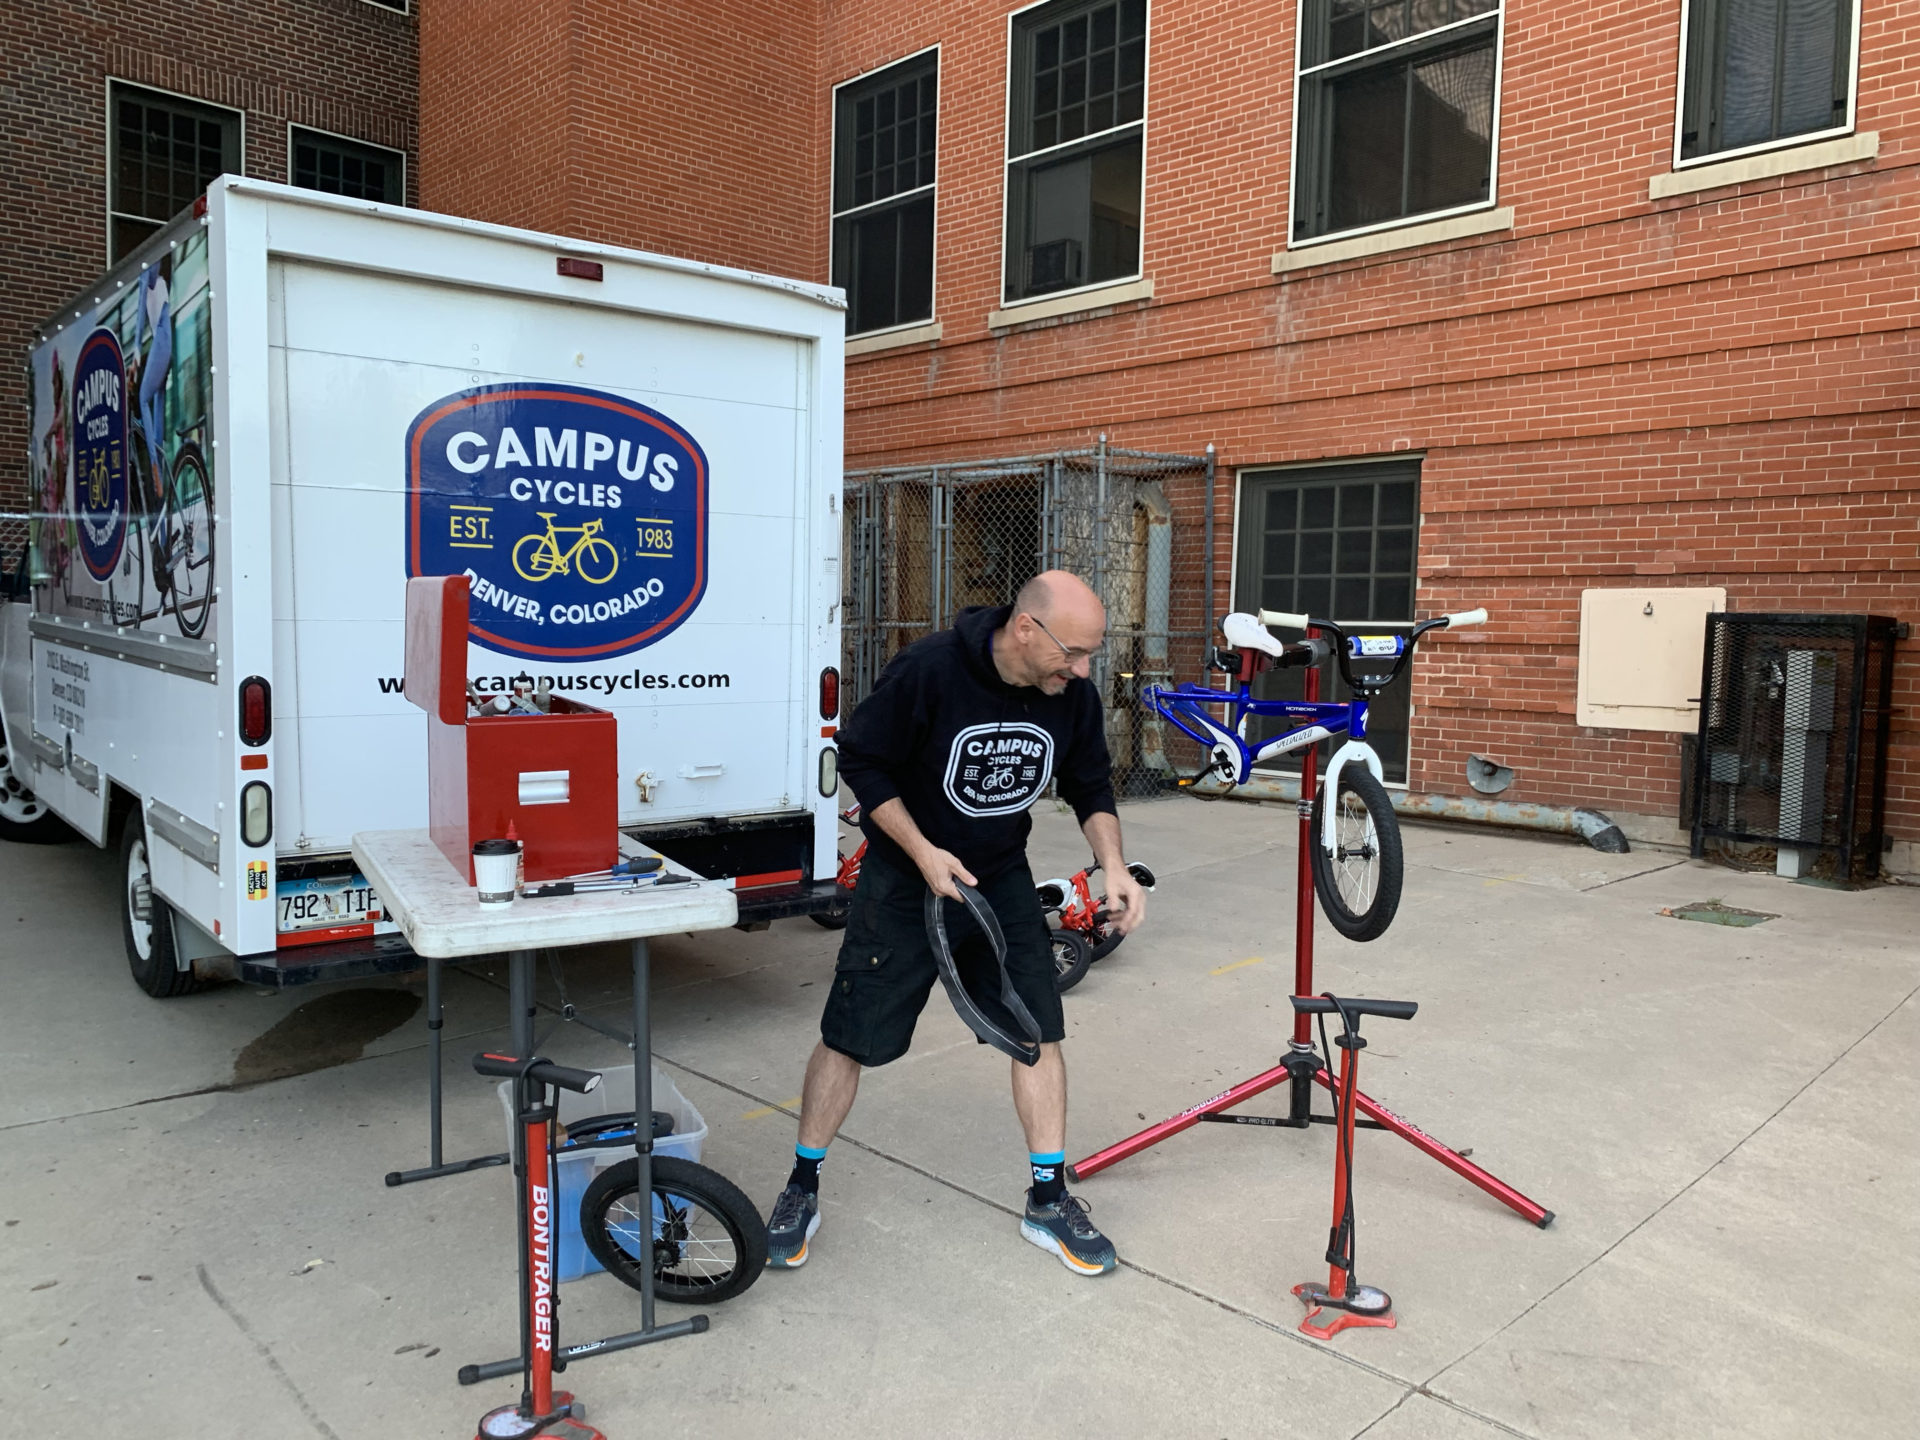 A man stands behind a vertical bike repair stand. There is a van behind him that has a logo for Campus Cycles. They are next to a red brick building.